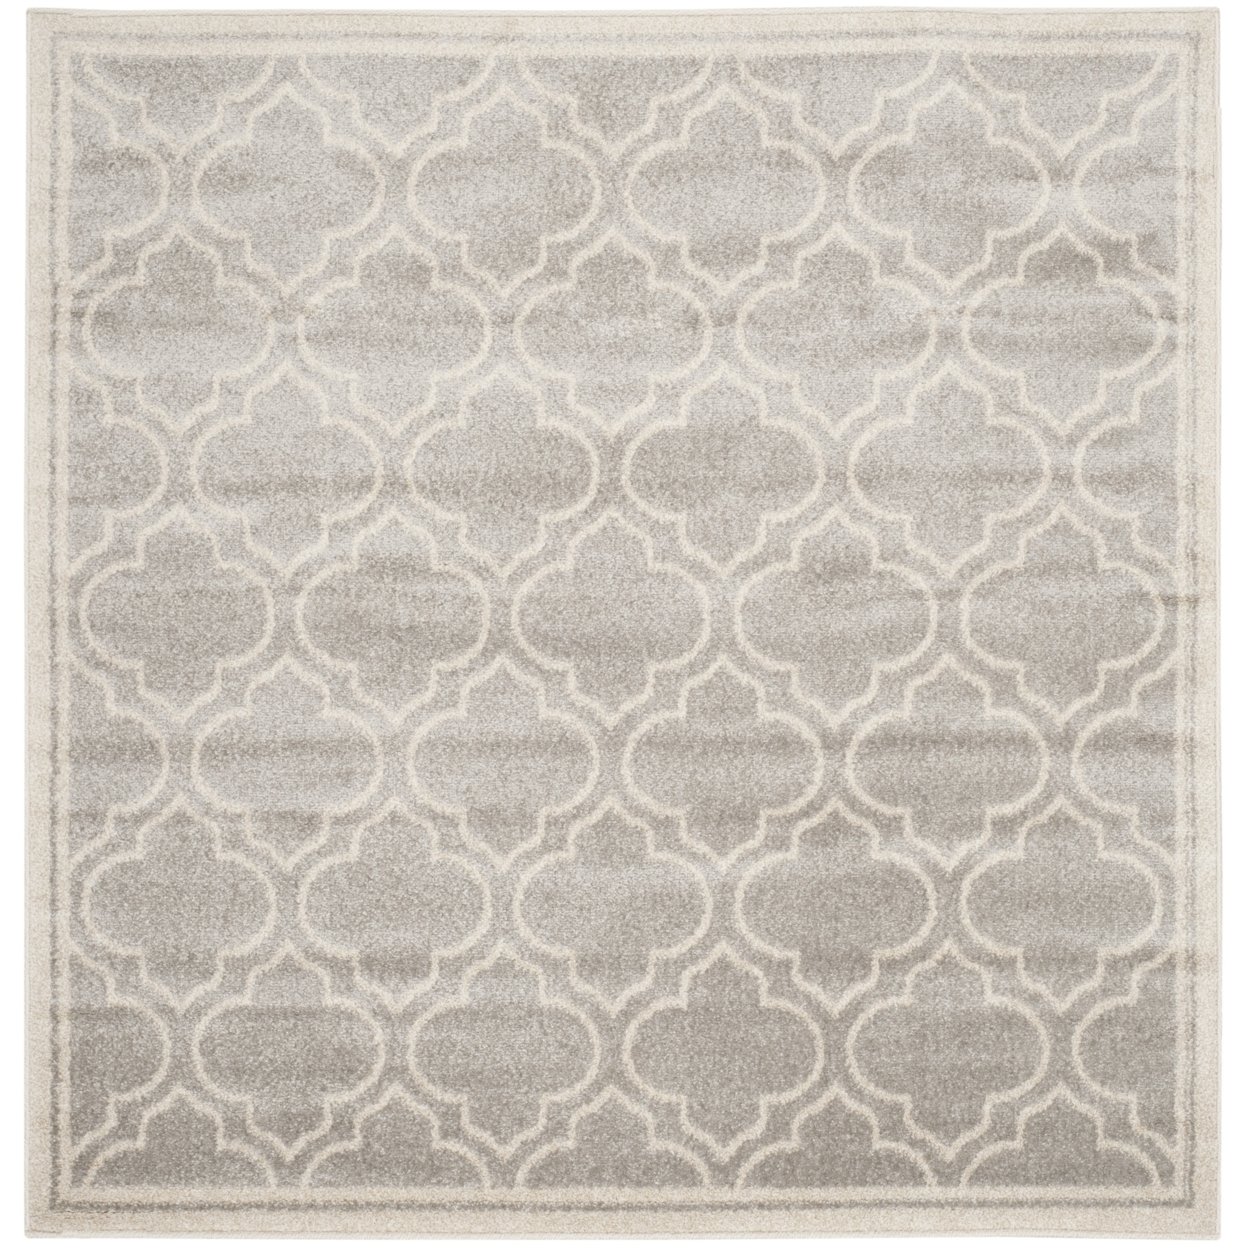 SAFAVIEH Amherst Collection AMT412B Light Grey/Ivory Rug - 5' Square